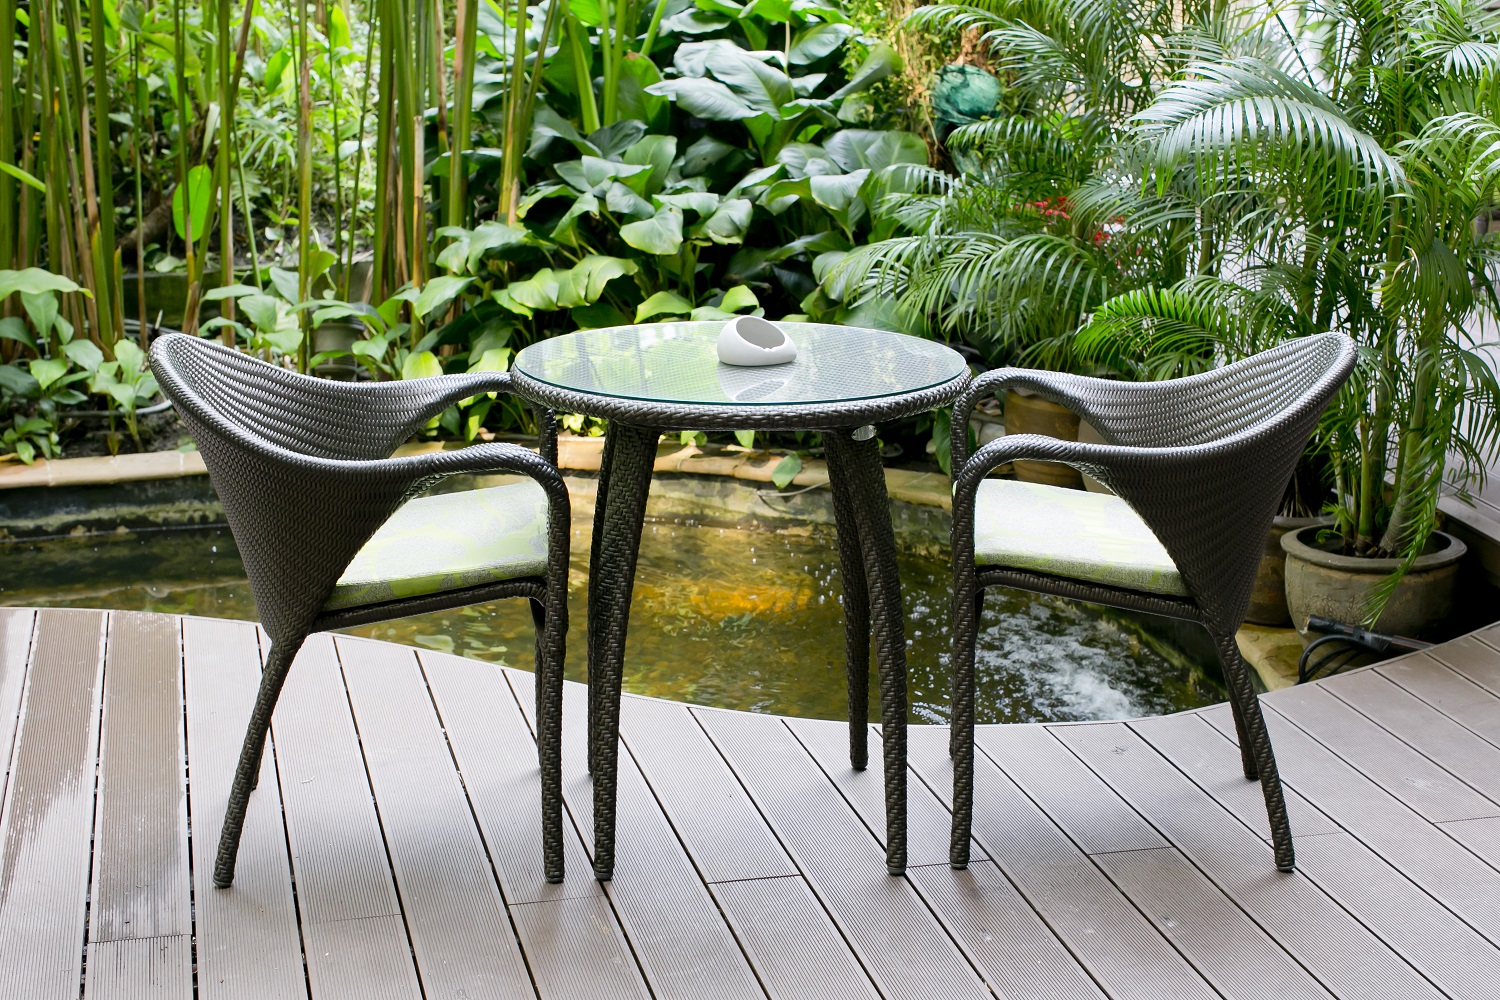 Wide Range Of Garden Furniture For Comfort And Style Free Clubs